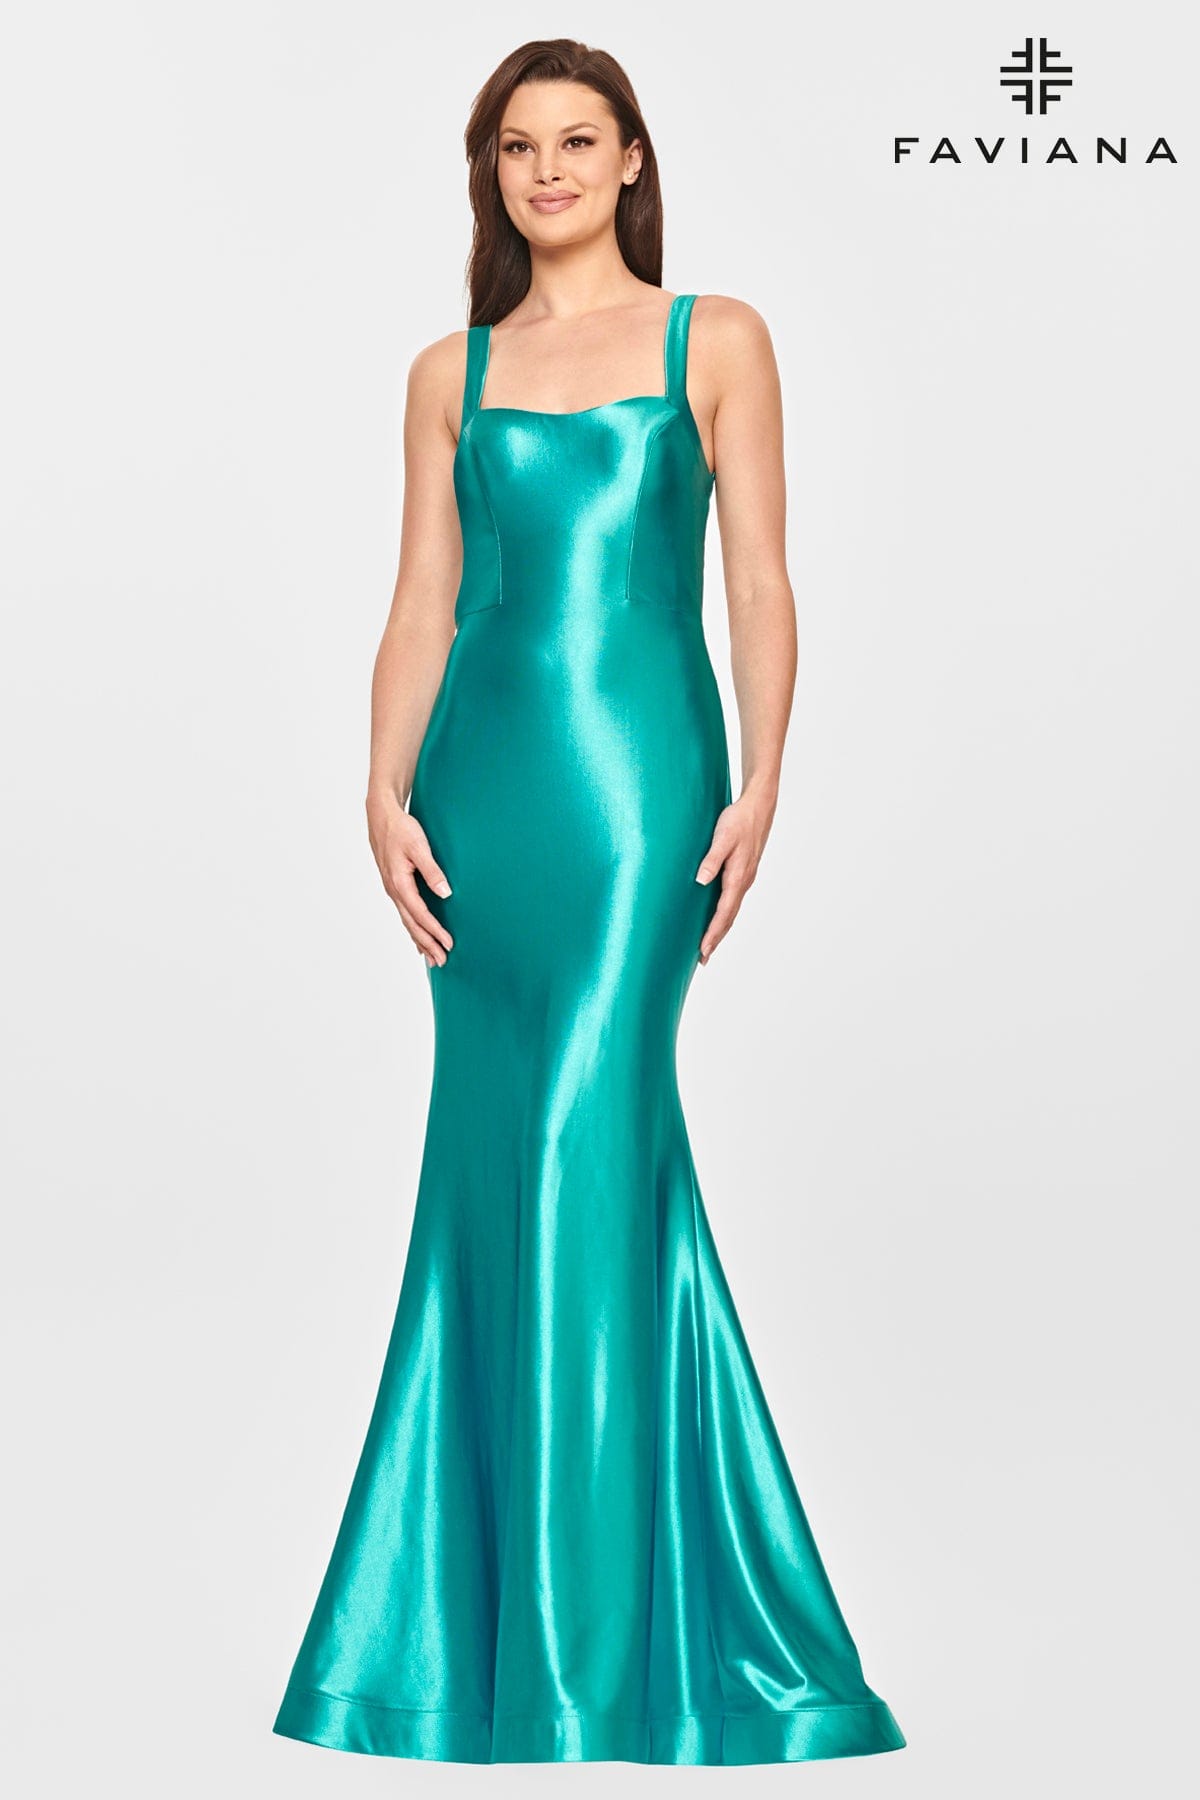 Peacock Satin Scoop Neck Dress With Strappy Open Back Detailing And Fit And Flare Skirt